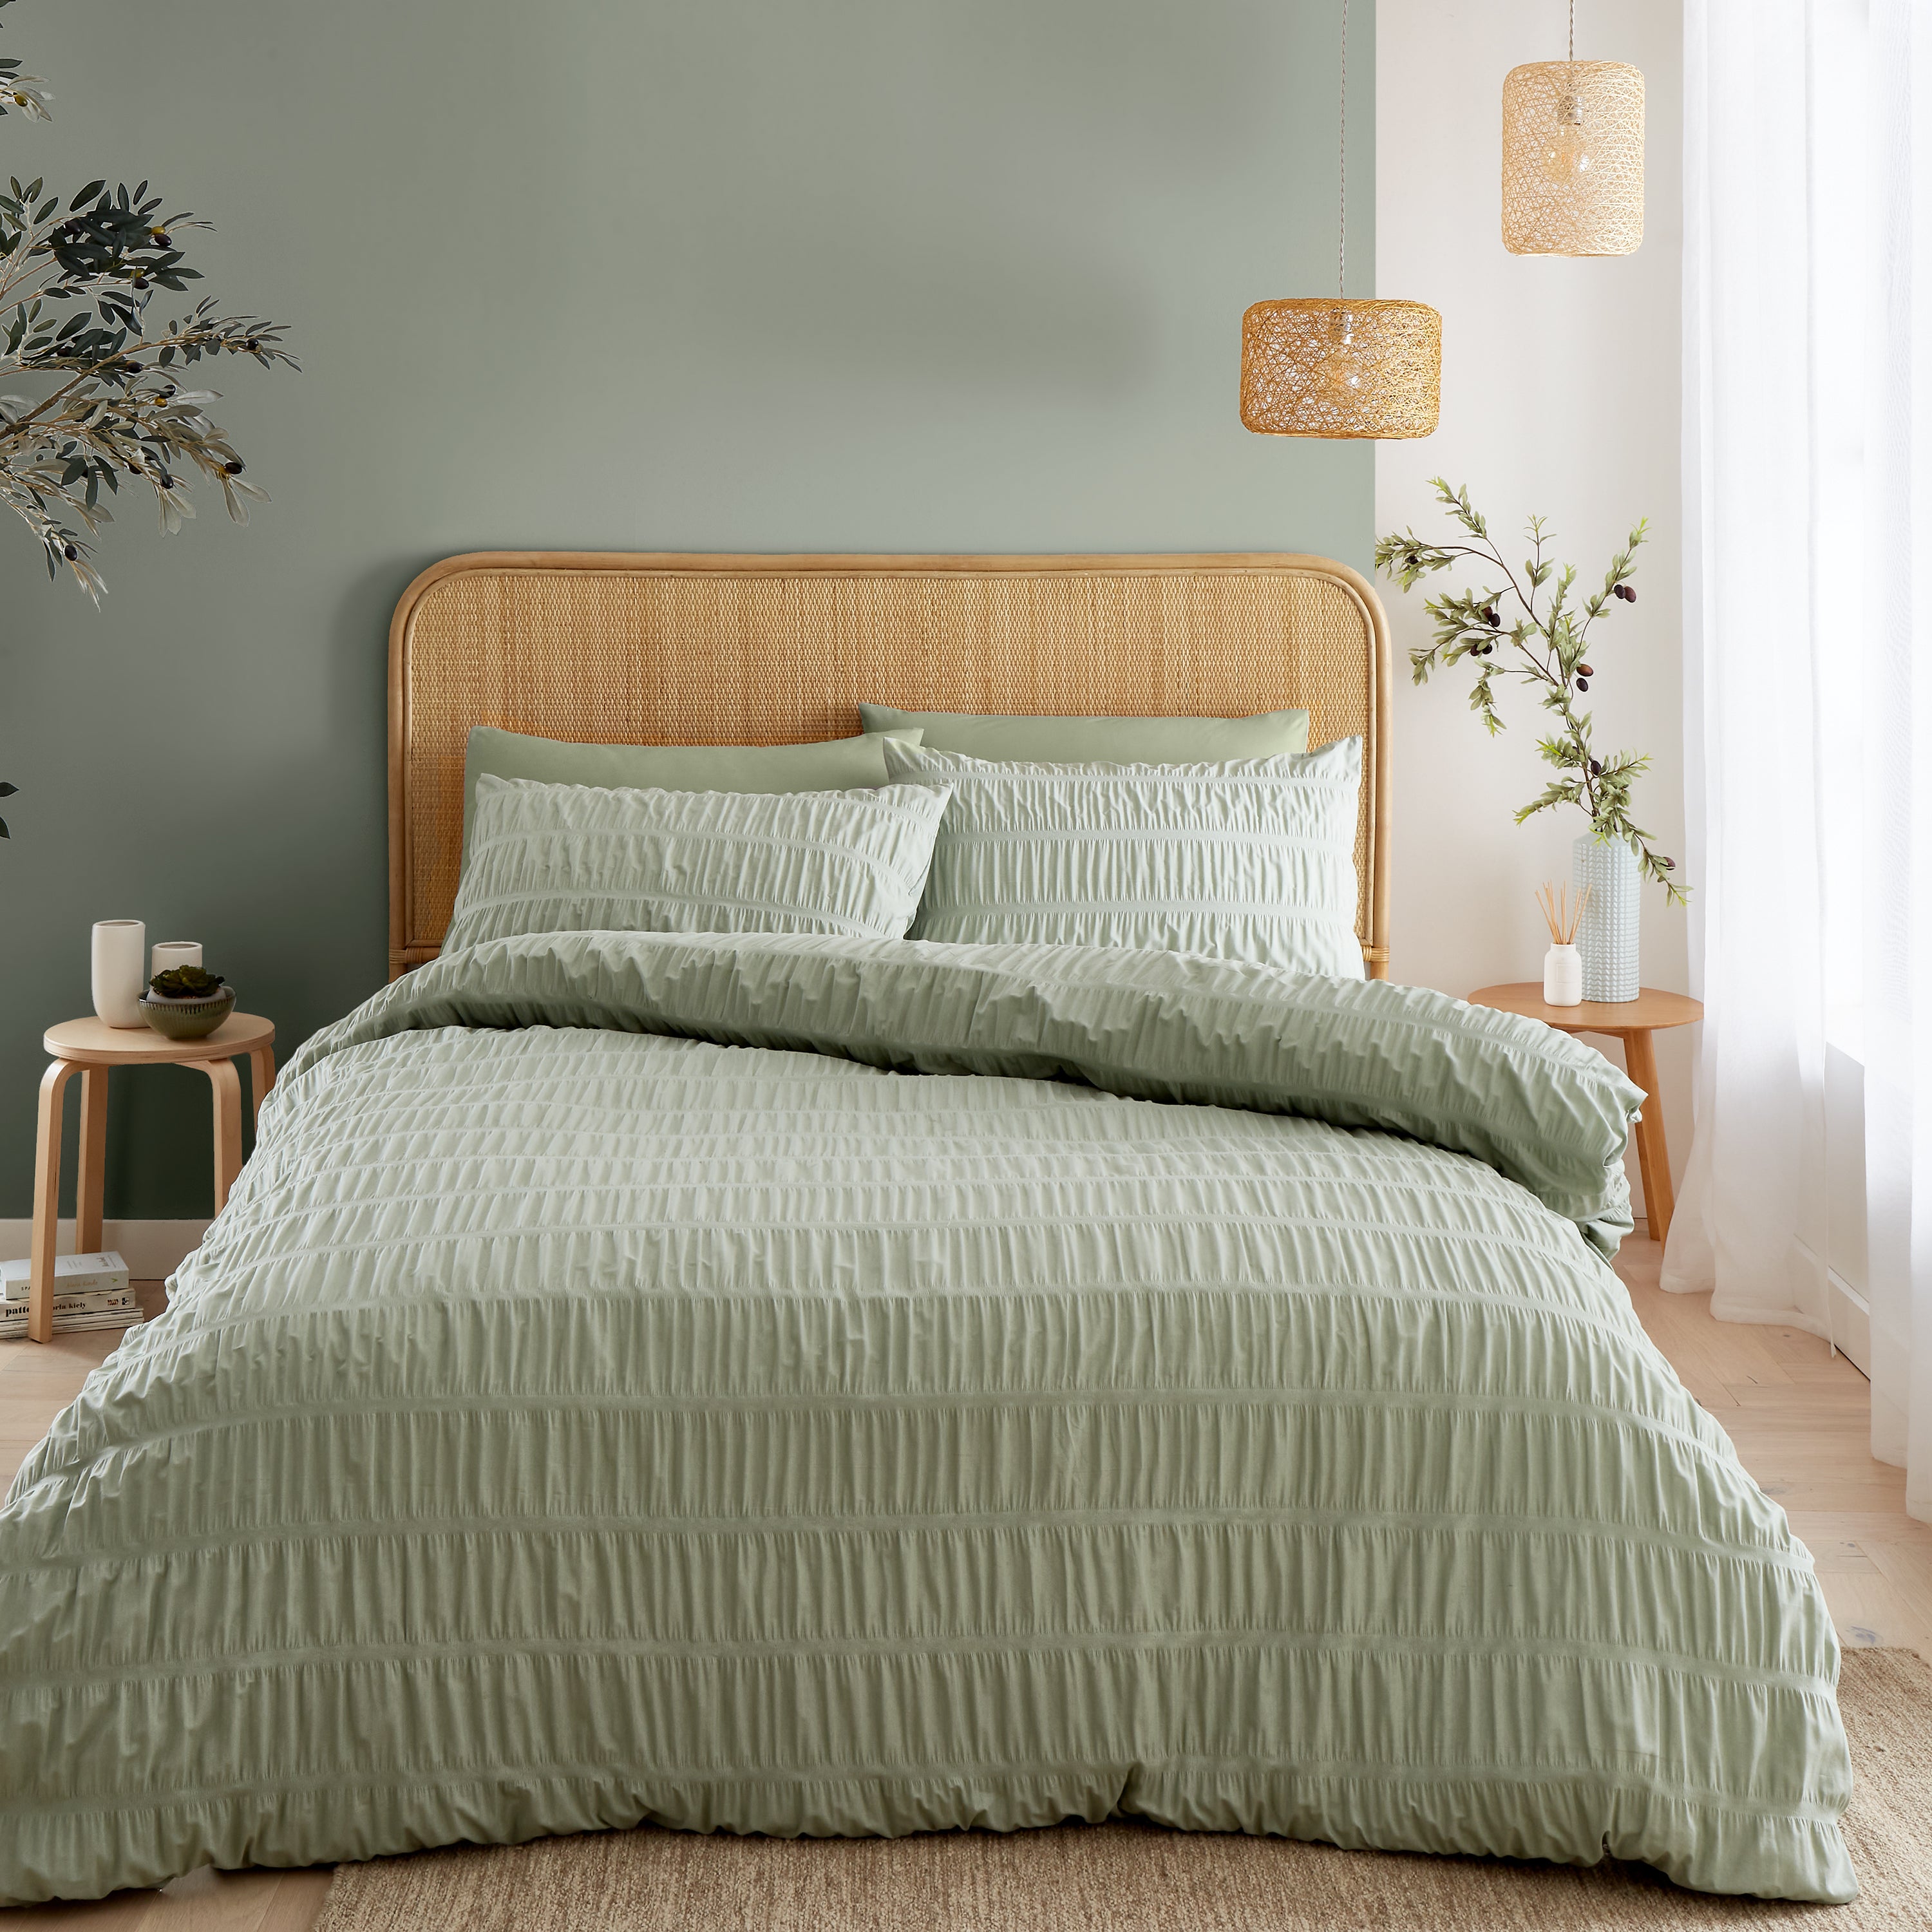 Photos - Bed Linen Catherine Lansfield Seersucker Sage Green Duvet Cover and Pillowcase Set S 